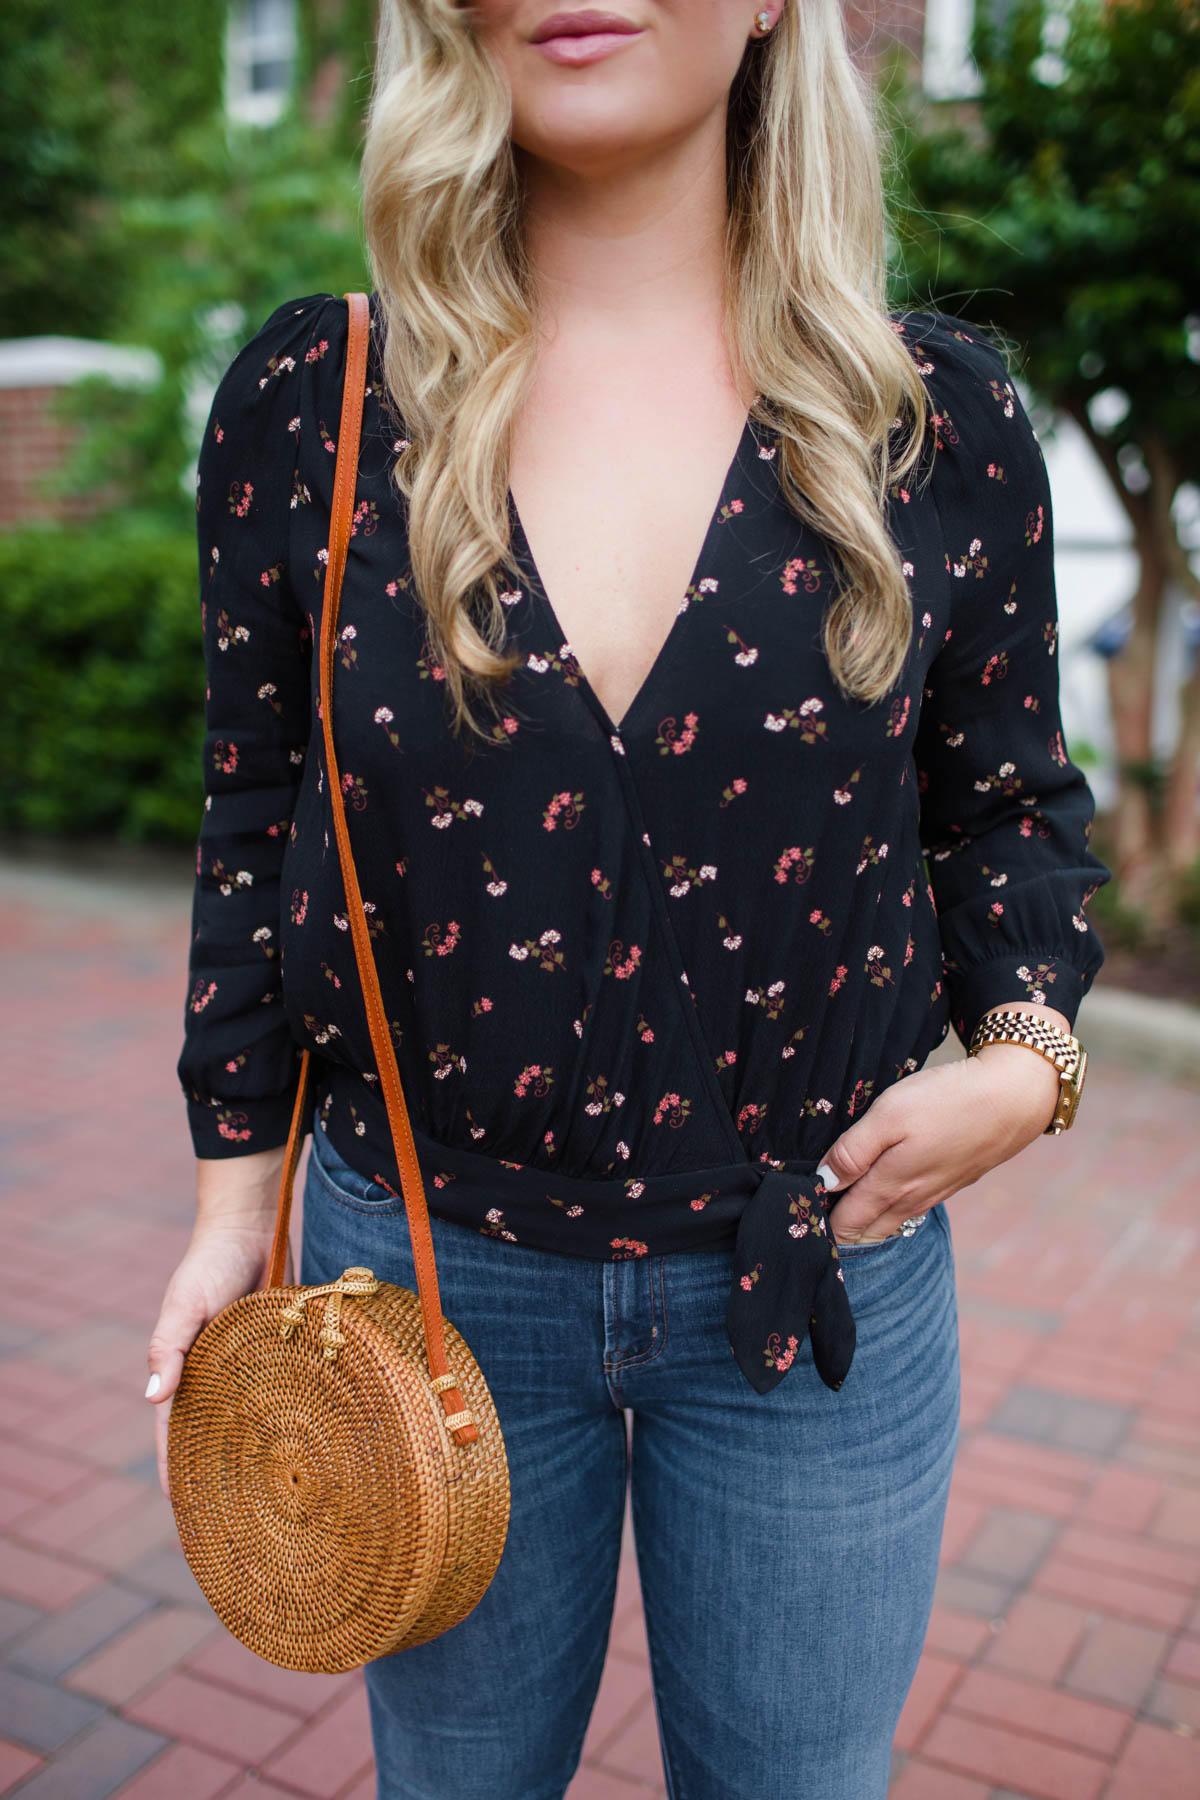 Wrap Tops for Summer | Outfit ...